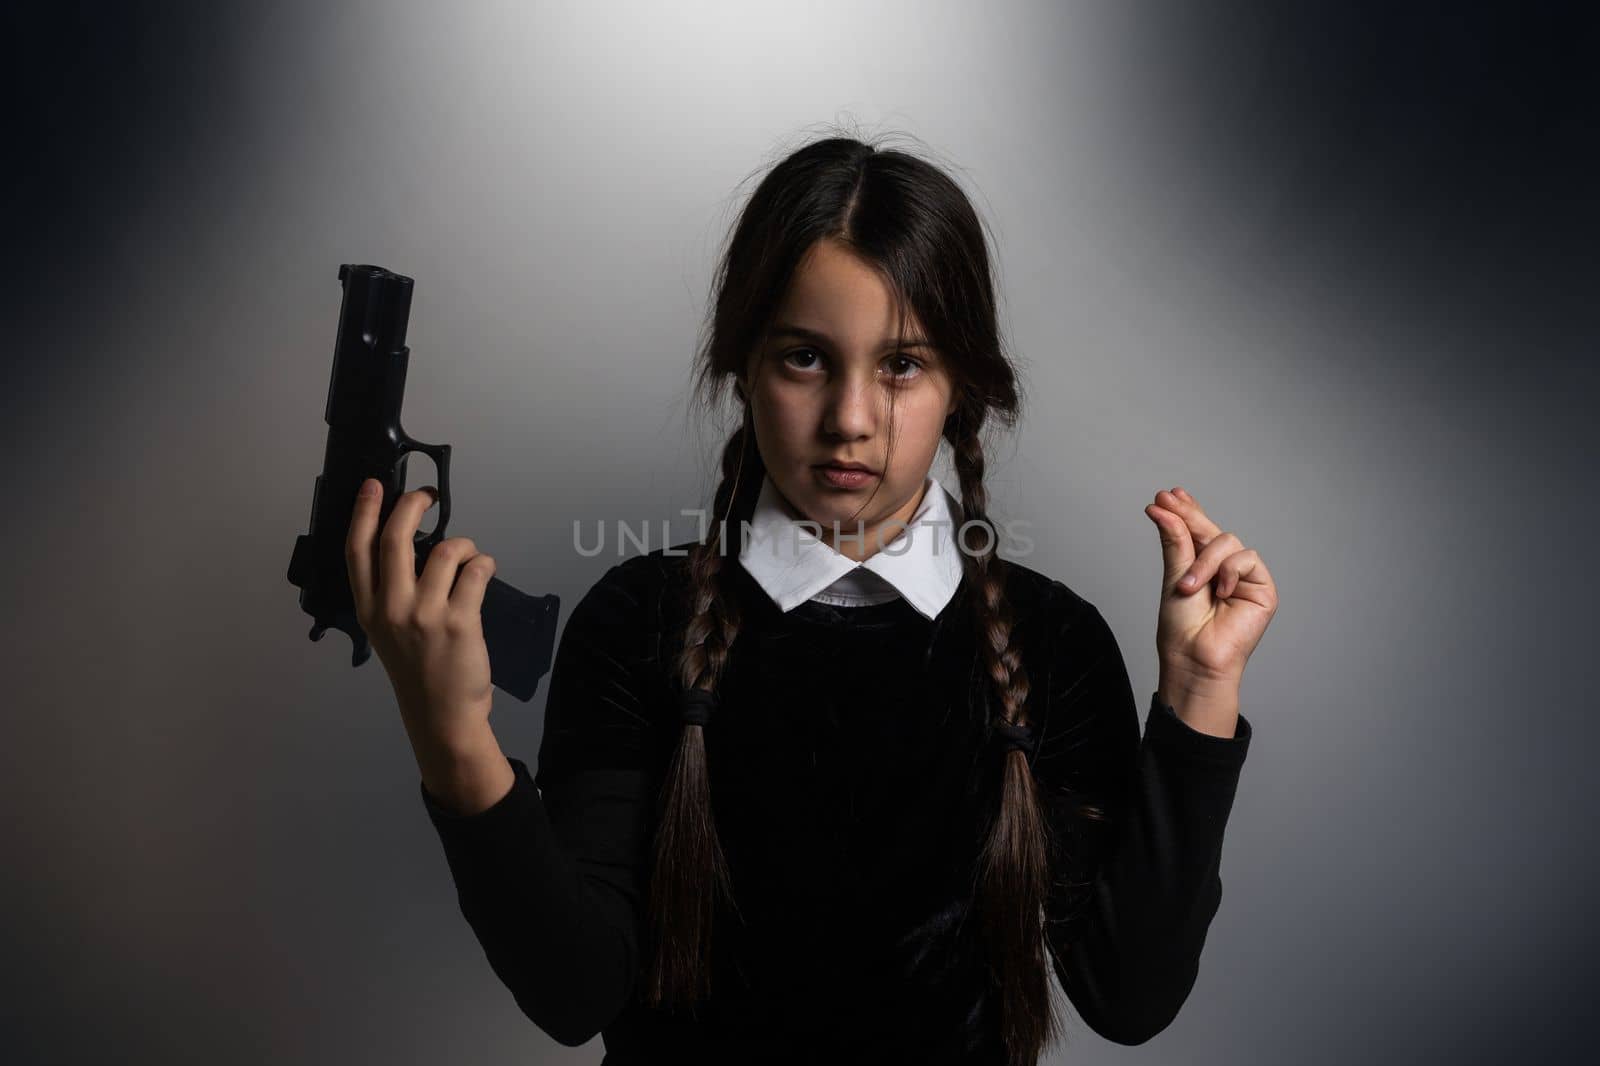 A girl with braids in a gothic style on a dark background with weapons.